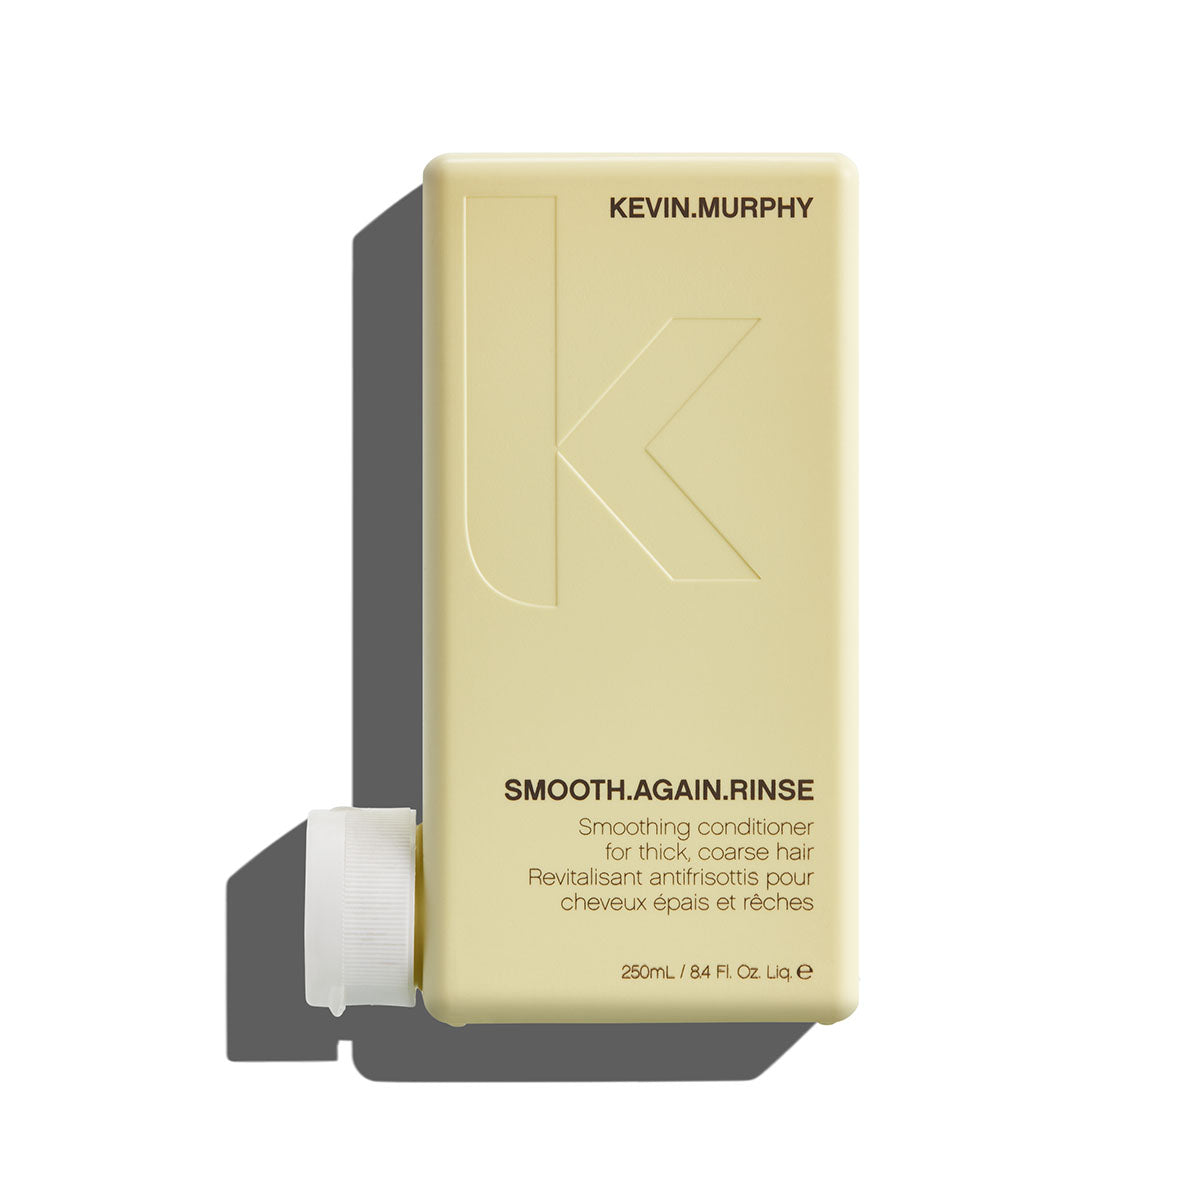 KEVIN.MURPHY Smooth Again Rinse 250ml